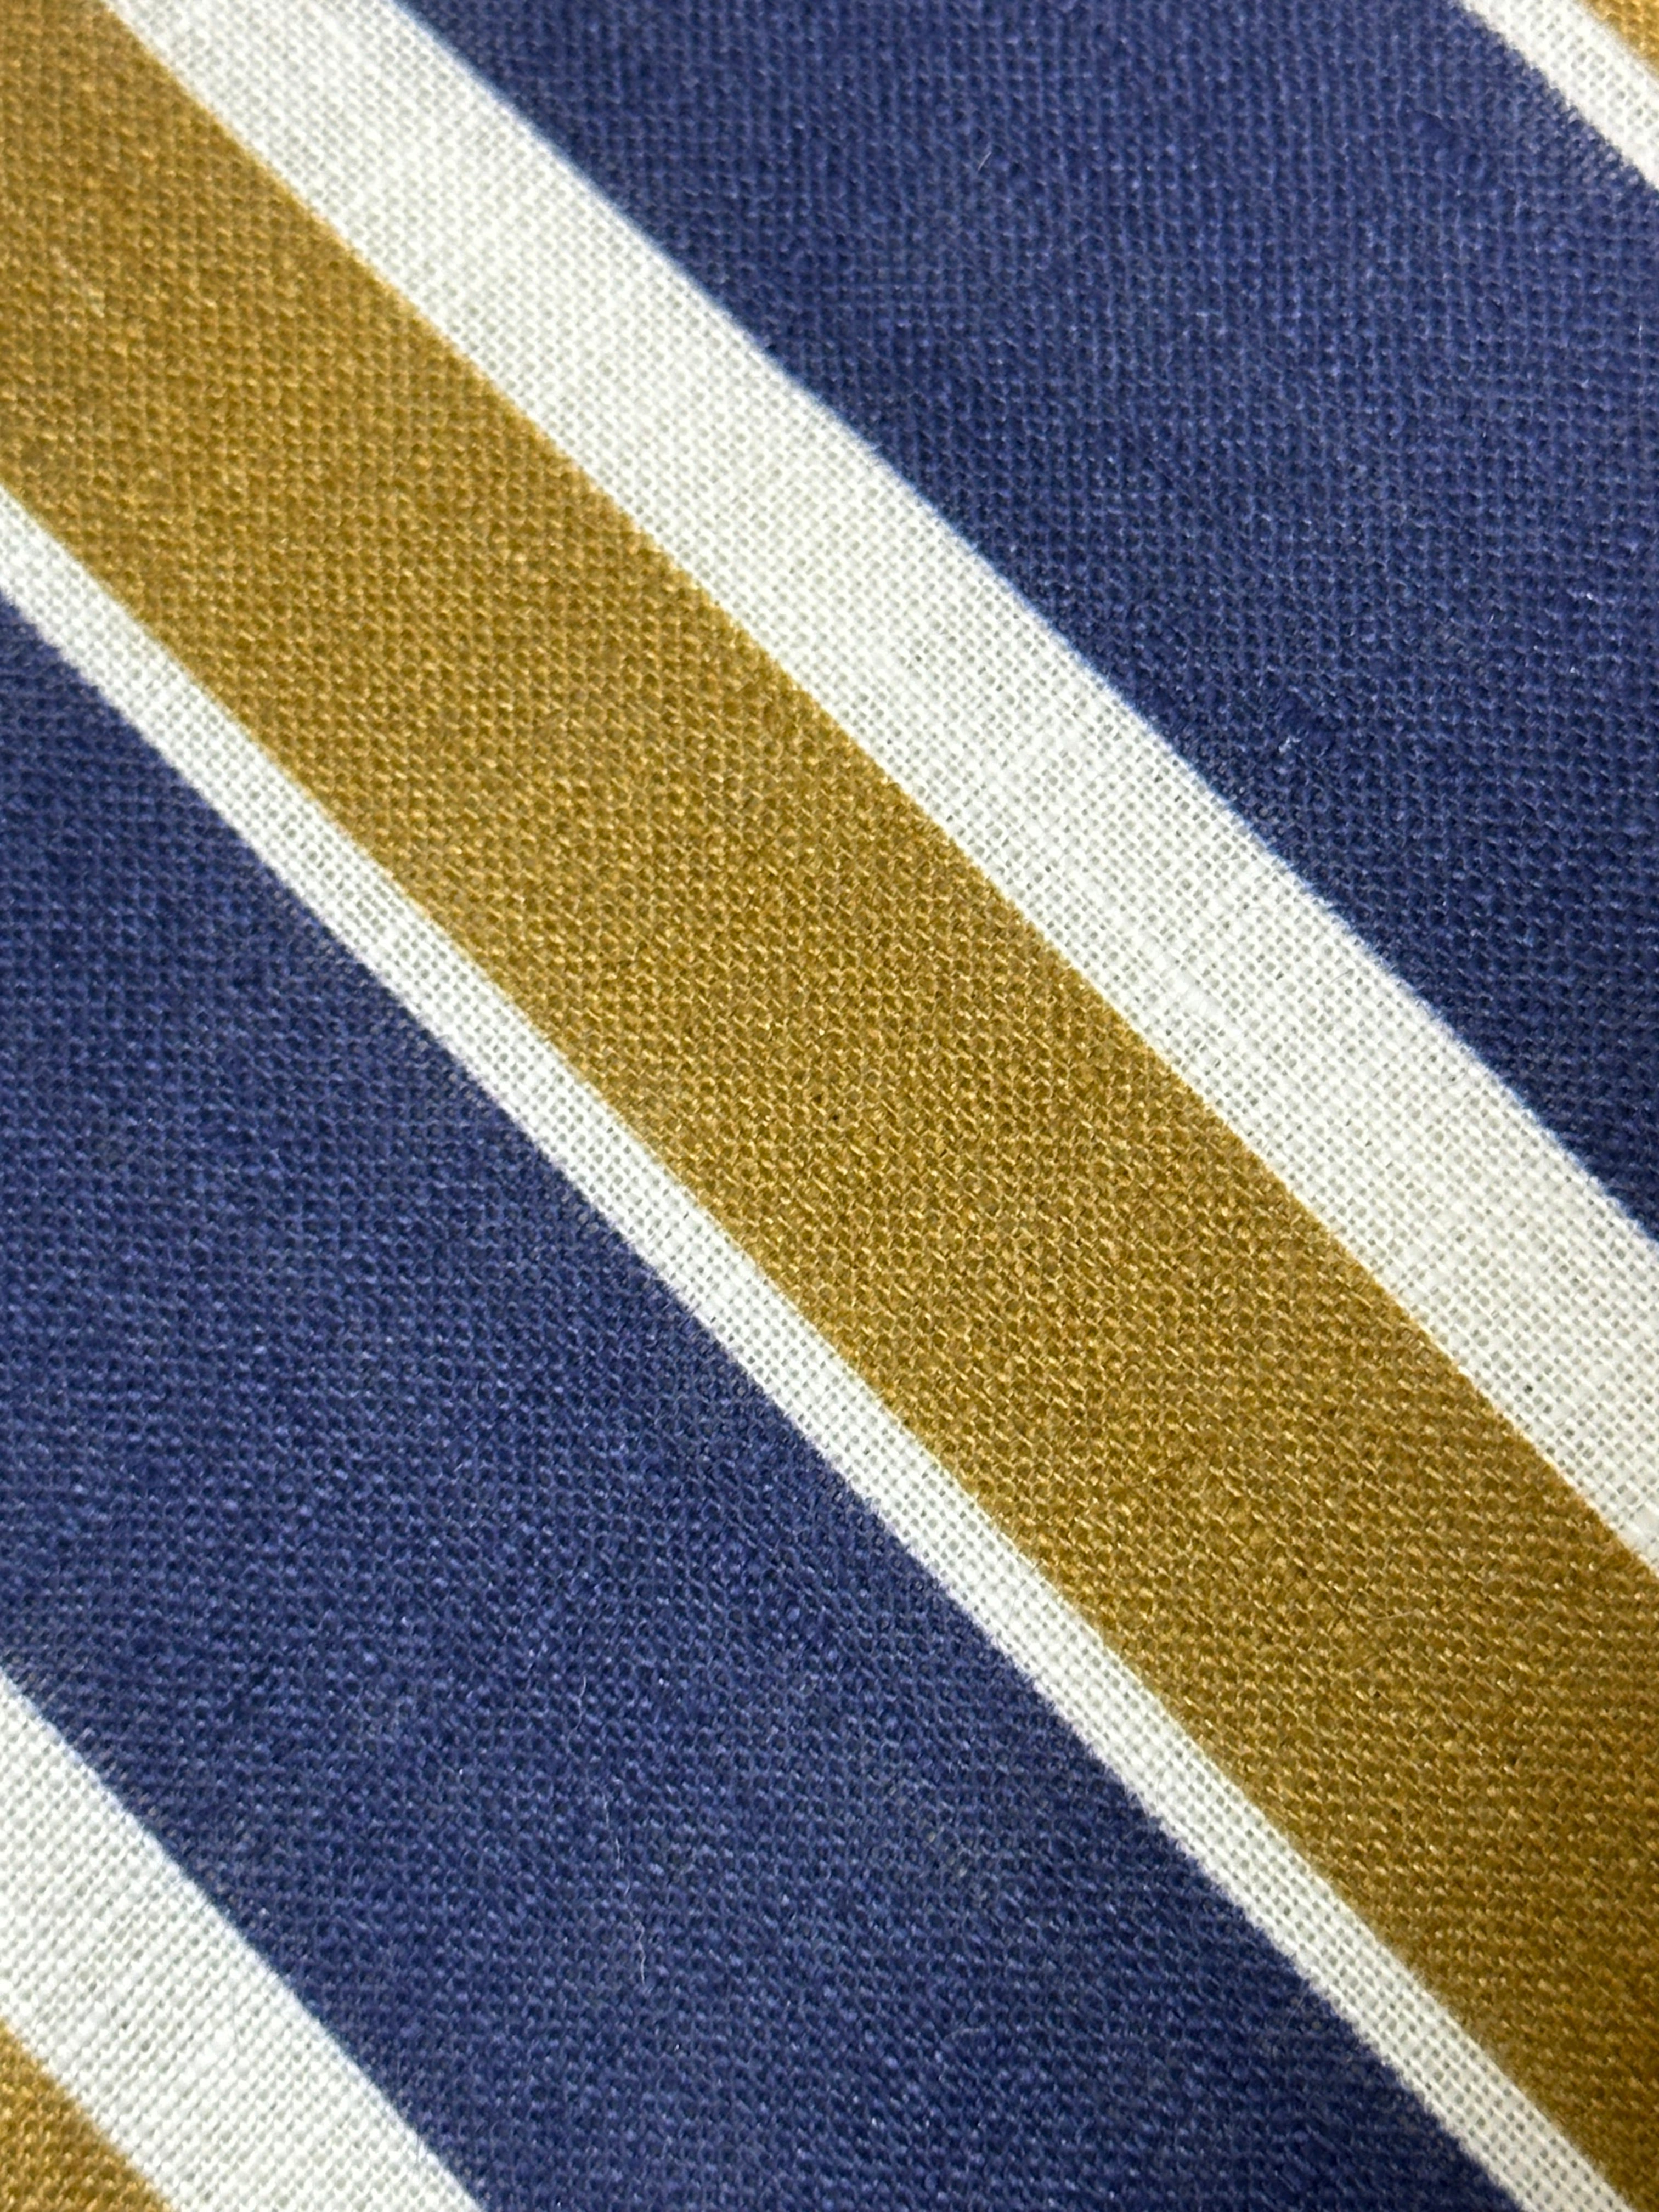 Gold and Navy Stripe Tie